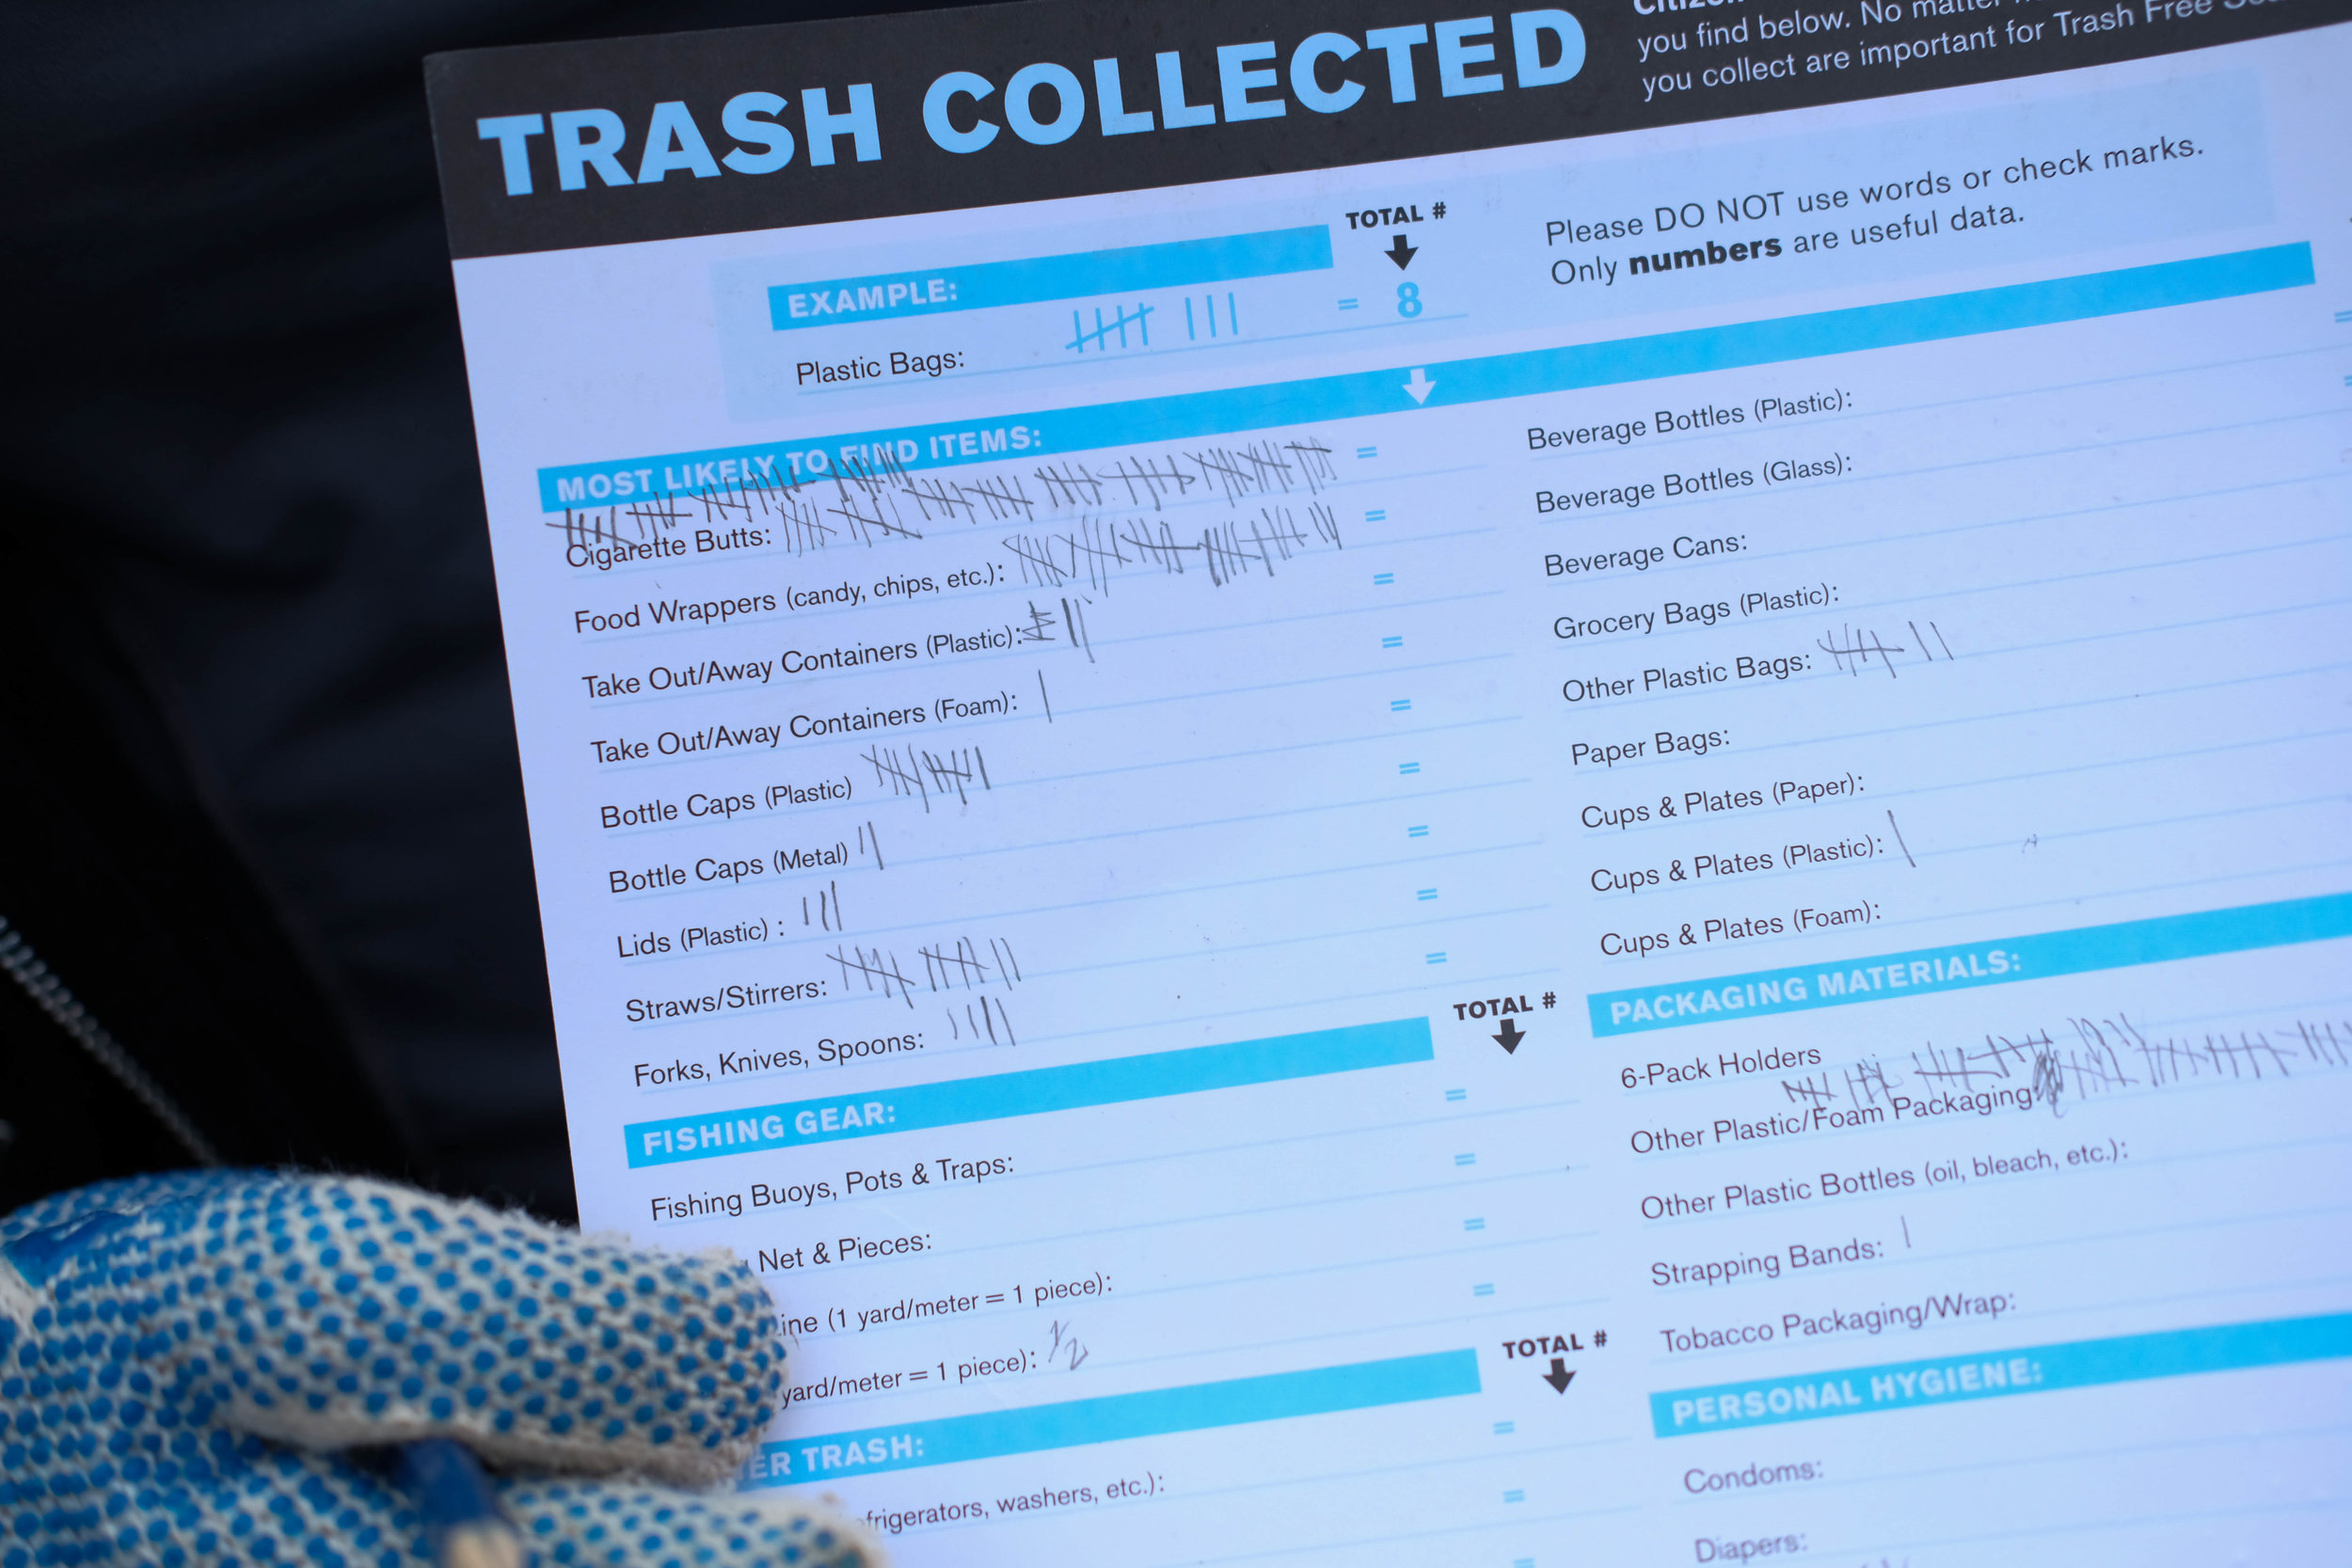  Maria Volkova shows the amoutn of trash collected on her Heal the Bay worksheet in Santa Monica, CALIF on September 15th, 2017. (Jayrol San Jose) 